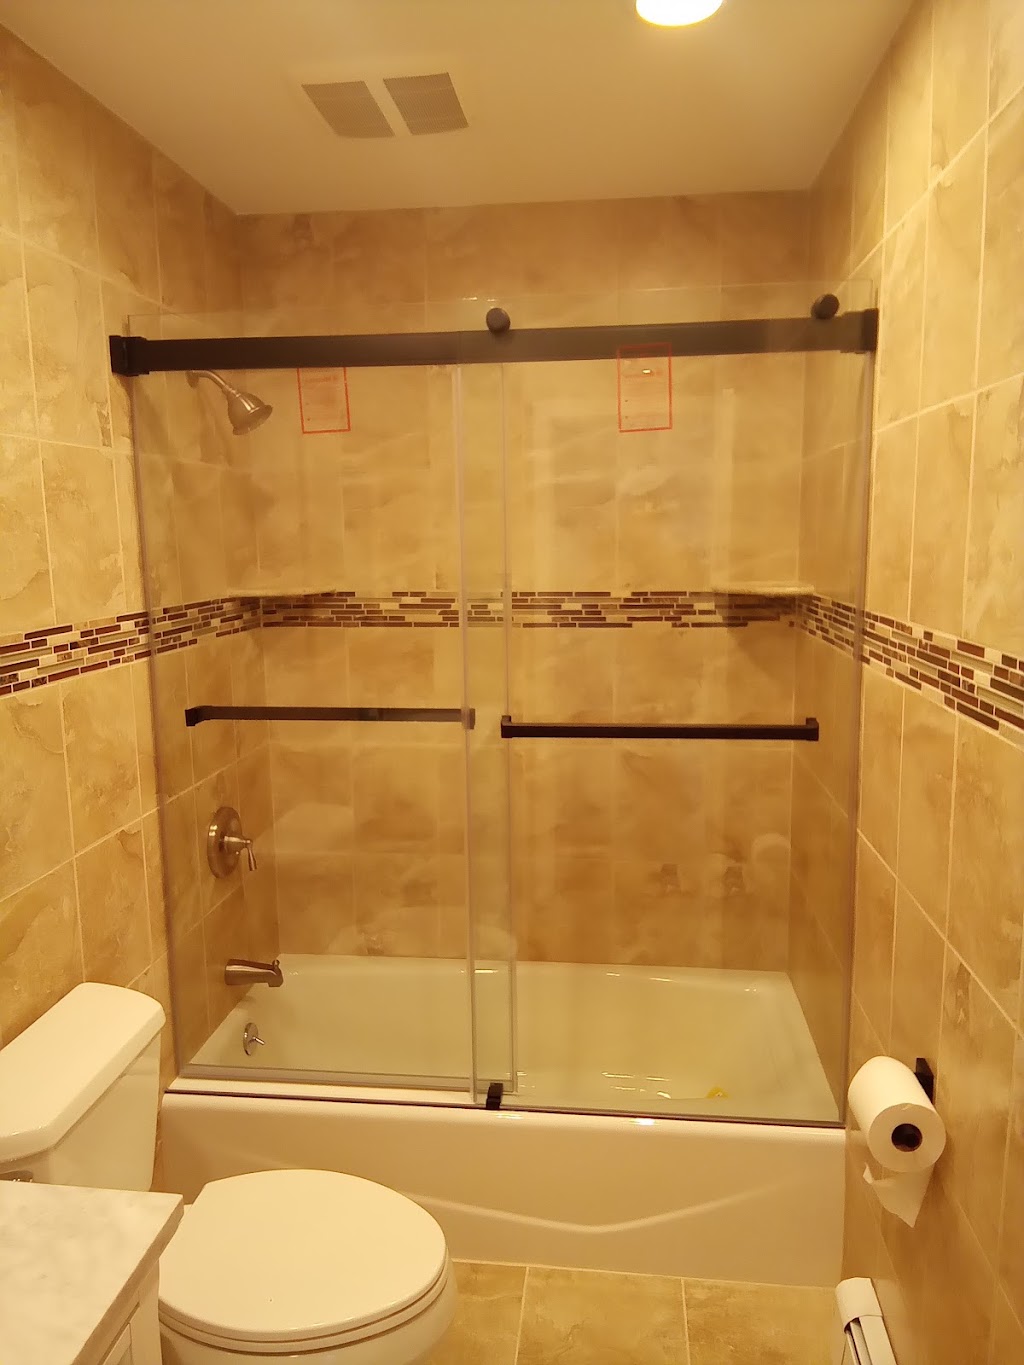 Oh My Gorgeous Shower Doors Inc. | 89 Montauk Hwy, Copiague, NY 11726 | Phone: (631) 842-2515